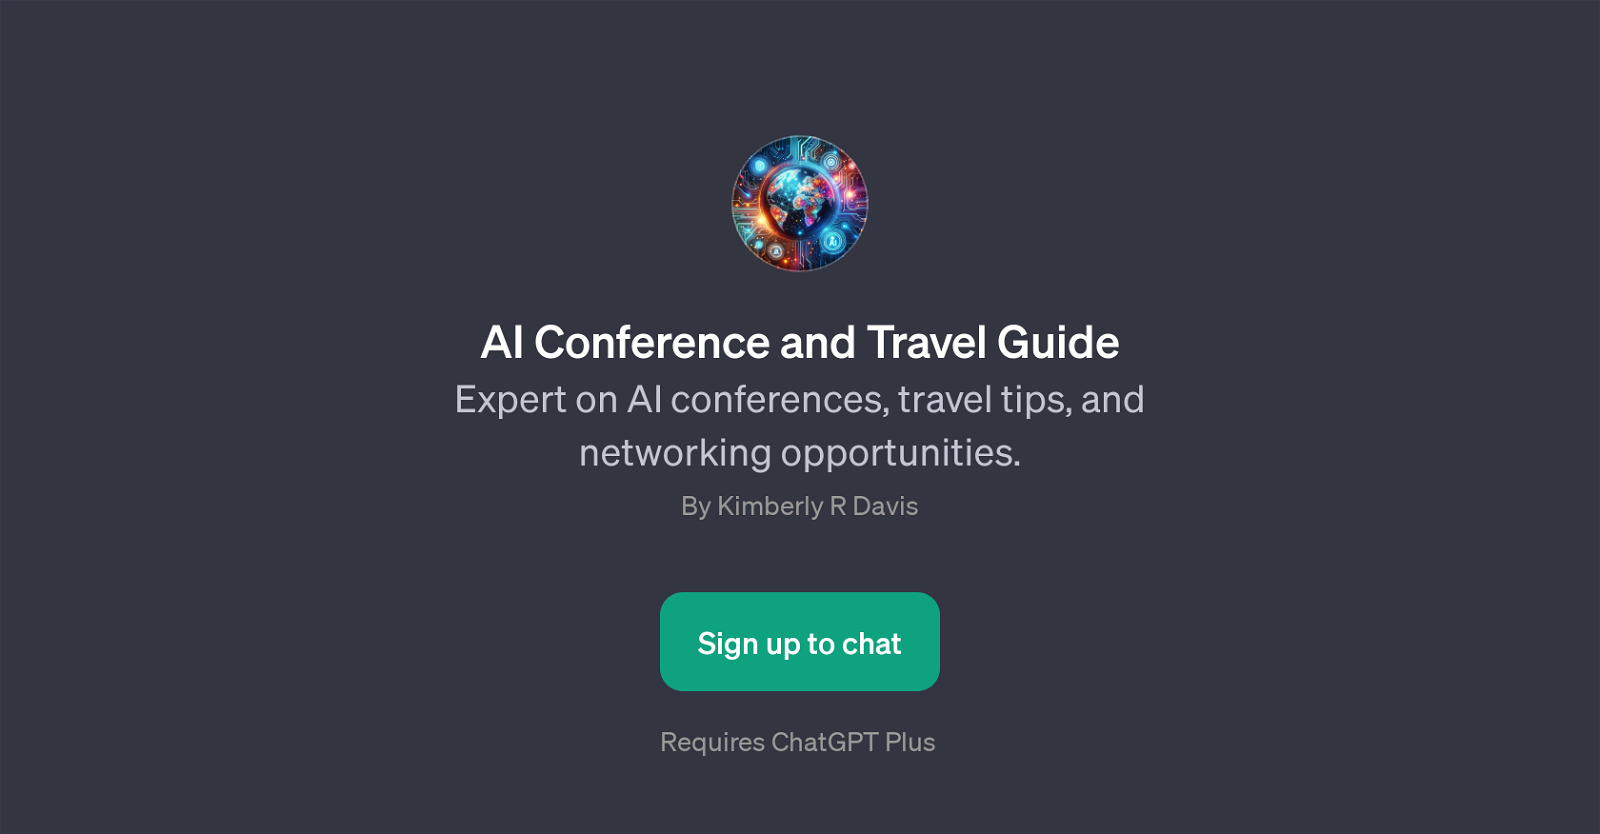 AI Conference and Travel Guide website